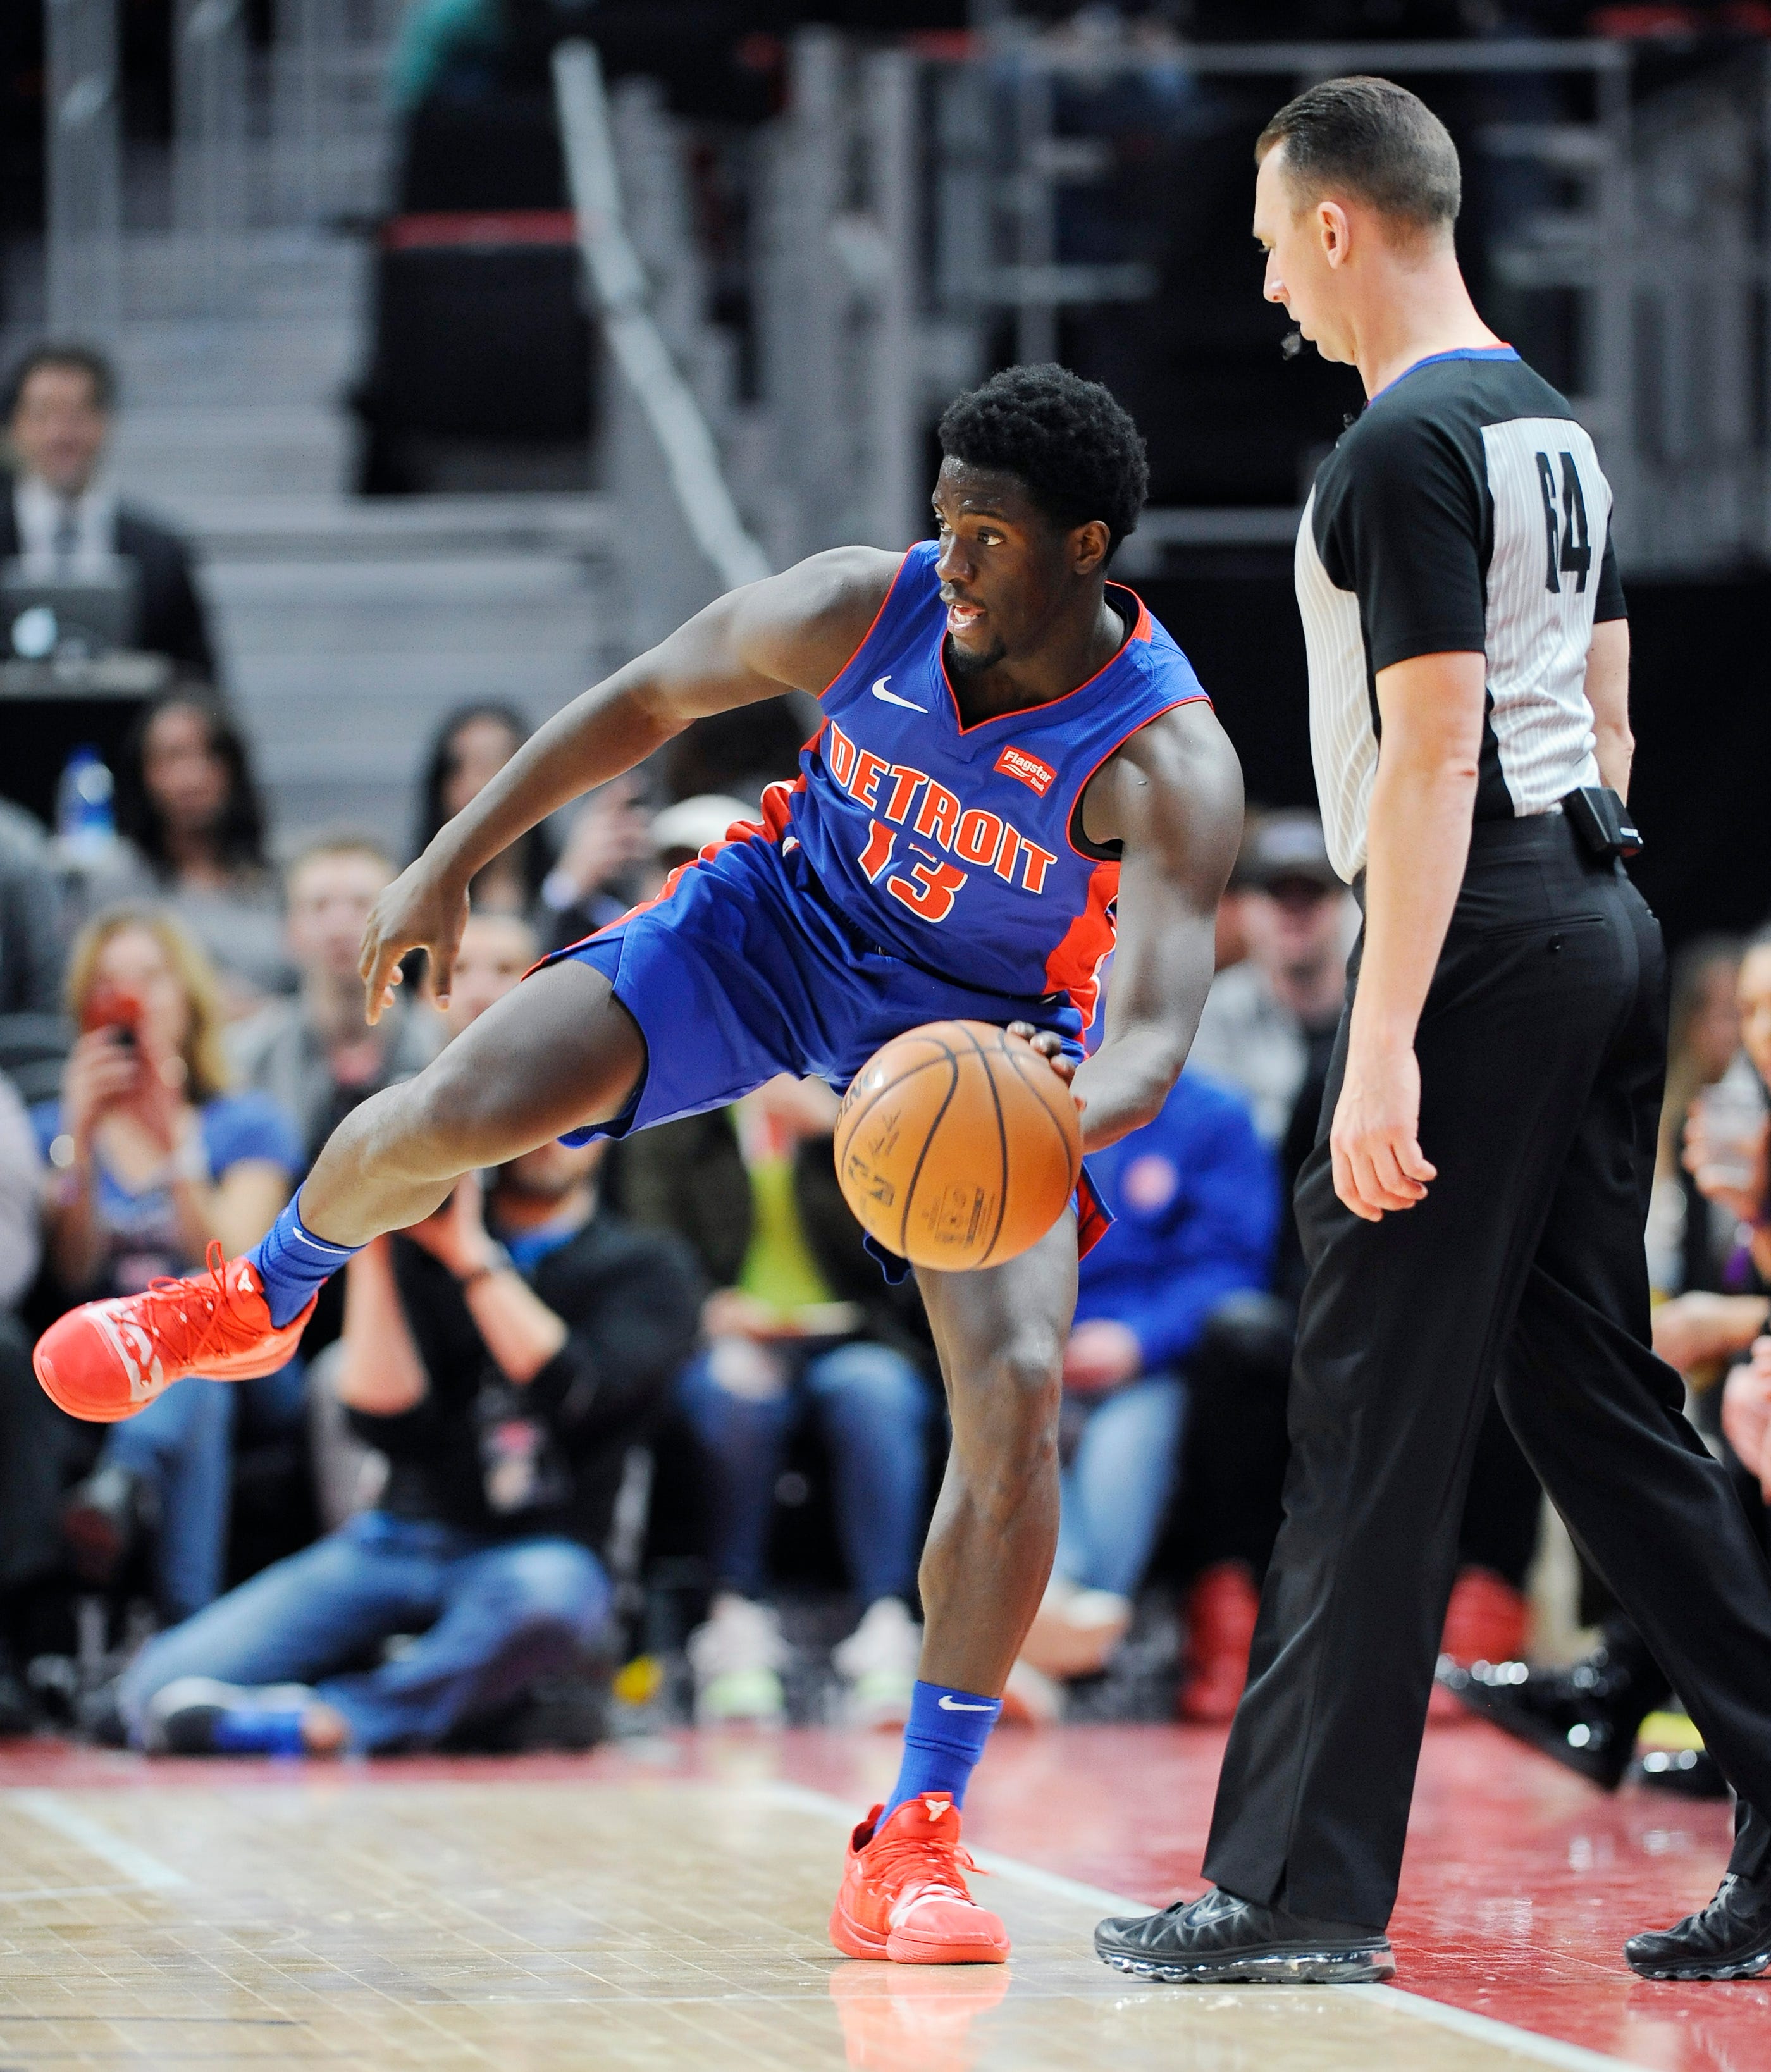 Khyri Thomas: Age: 23. Ht: 6-3. Wt: 210. 2018-19 stats: 2.3 pts, 0.8 rebs, 29% 3FG. Outlook: He played sparingly in the preseason and with so many experienced guards, Thomas has fallen down the depth chart. In his second season, he ’ ll have a lot to prove but will have to compete for playing time. He could spend more time in the G League to get some seasoning.